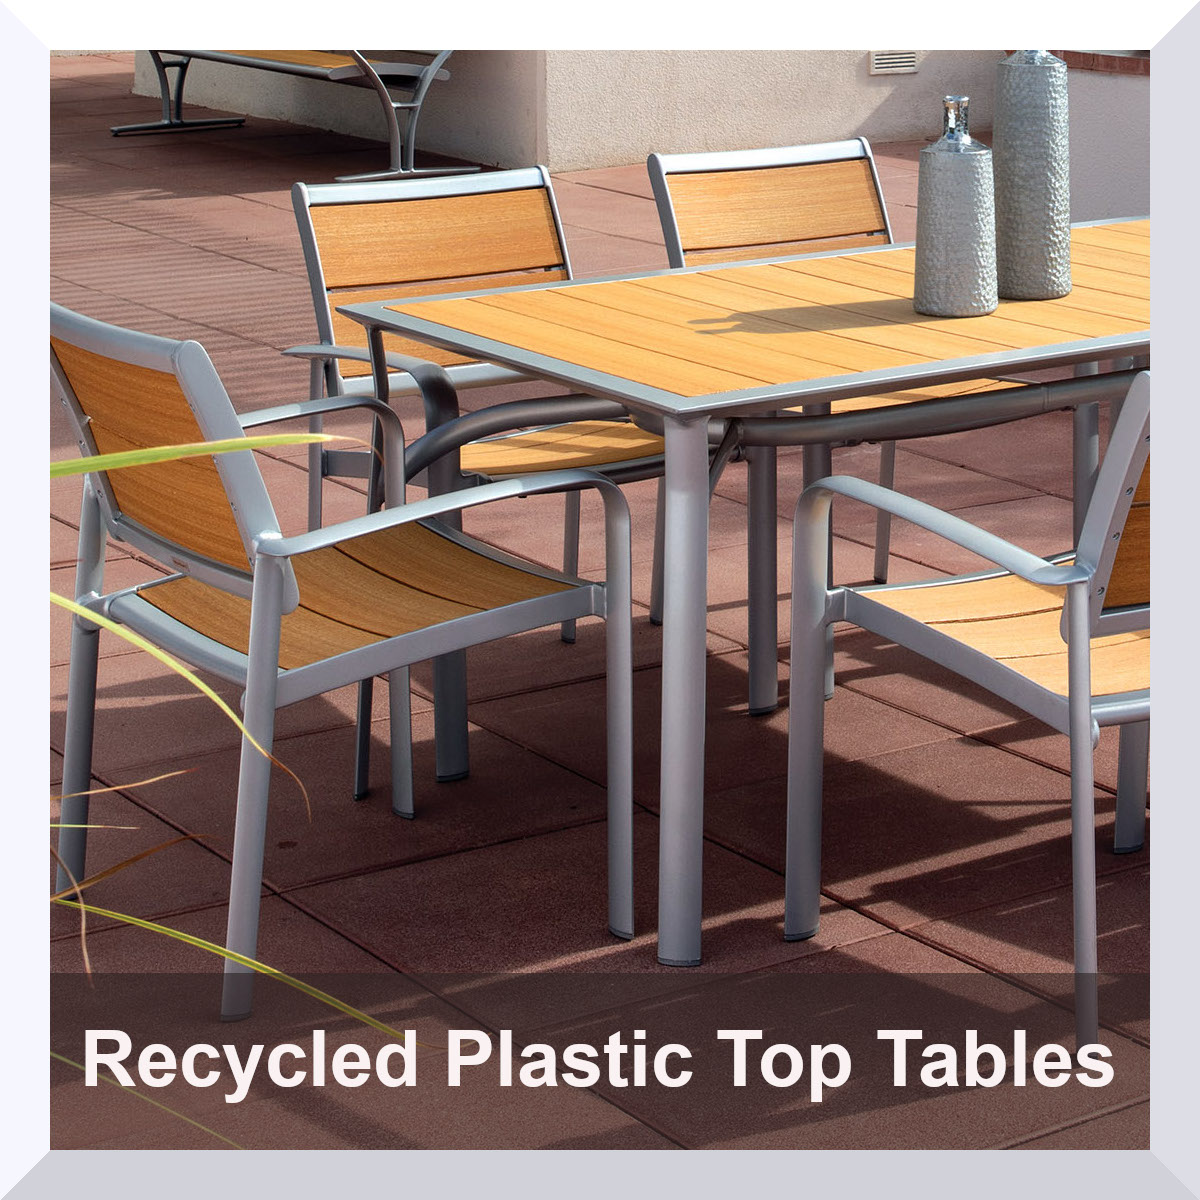 Recycled Plastic Top Tables